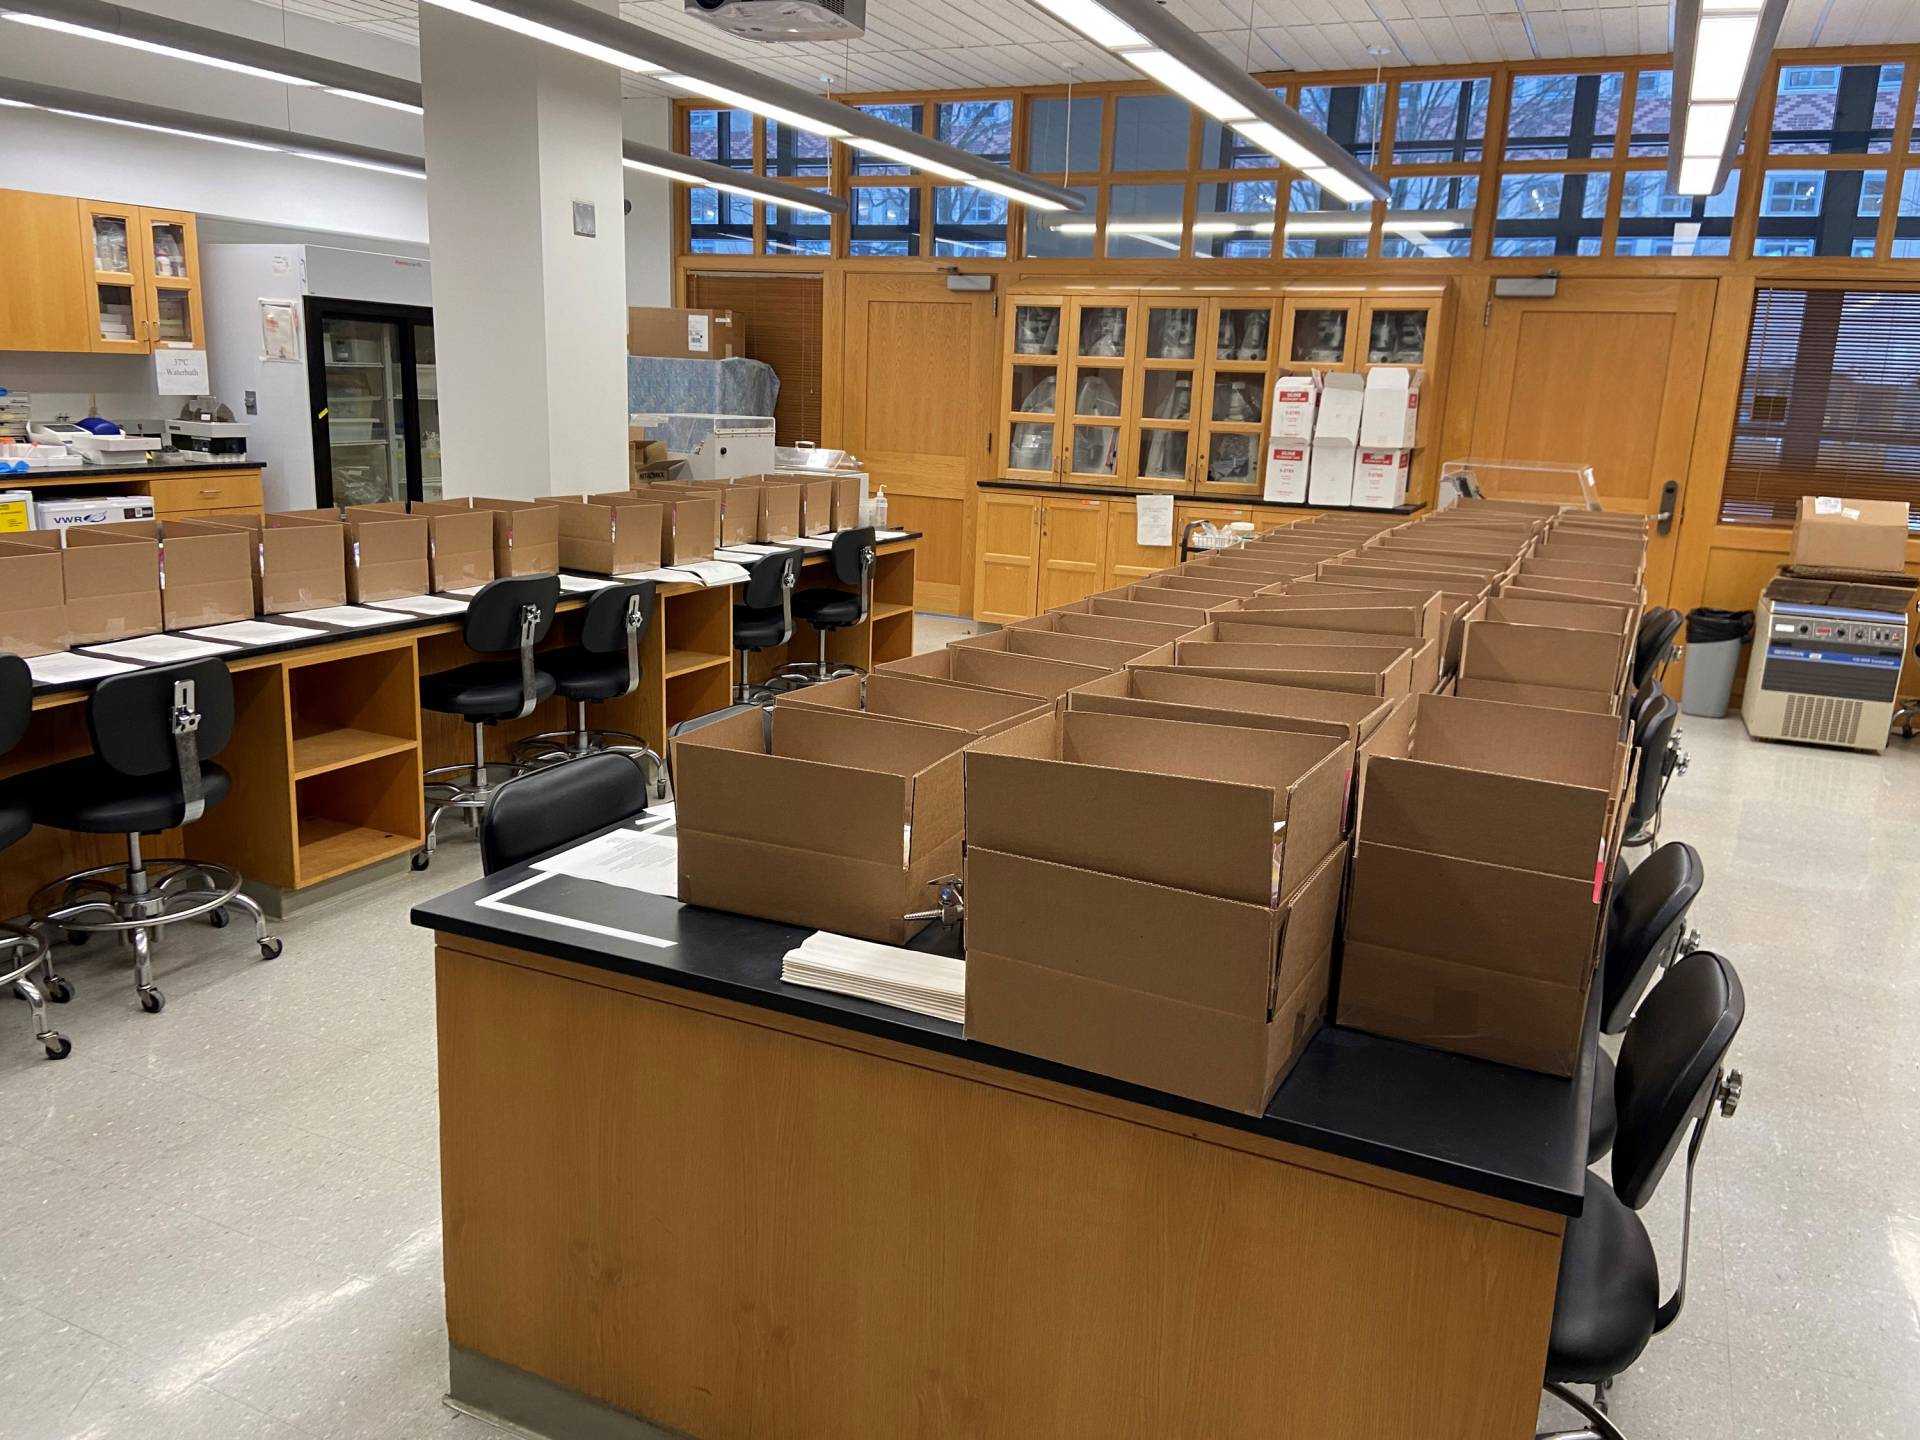 Rows of open cardboard boxes in a classroom laboratory 